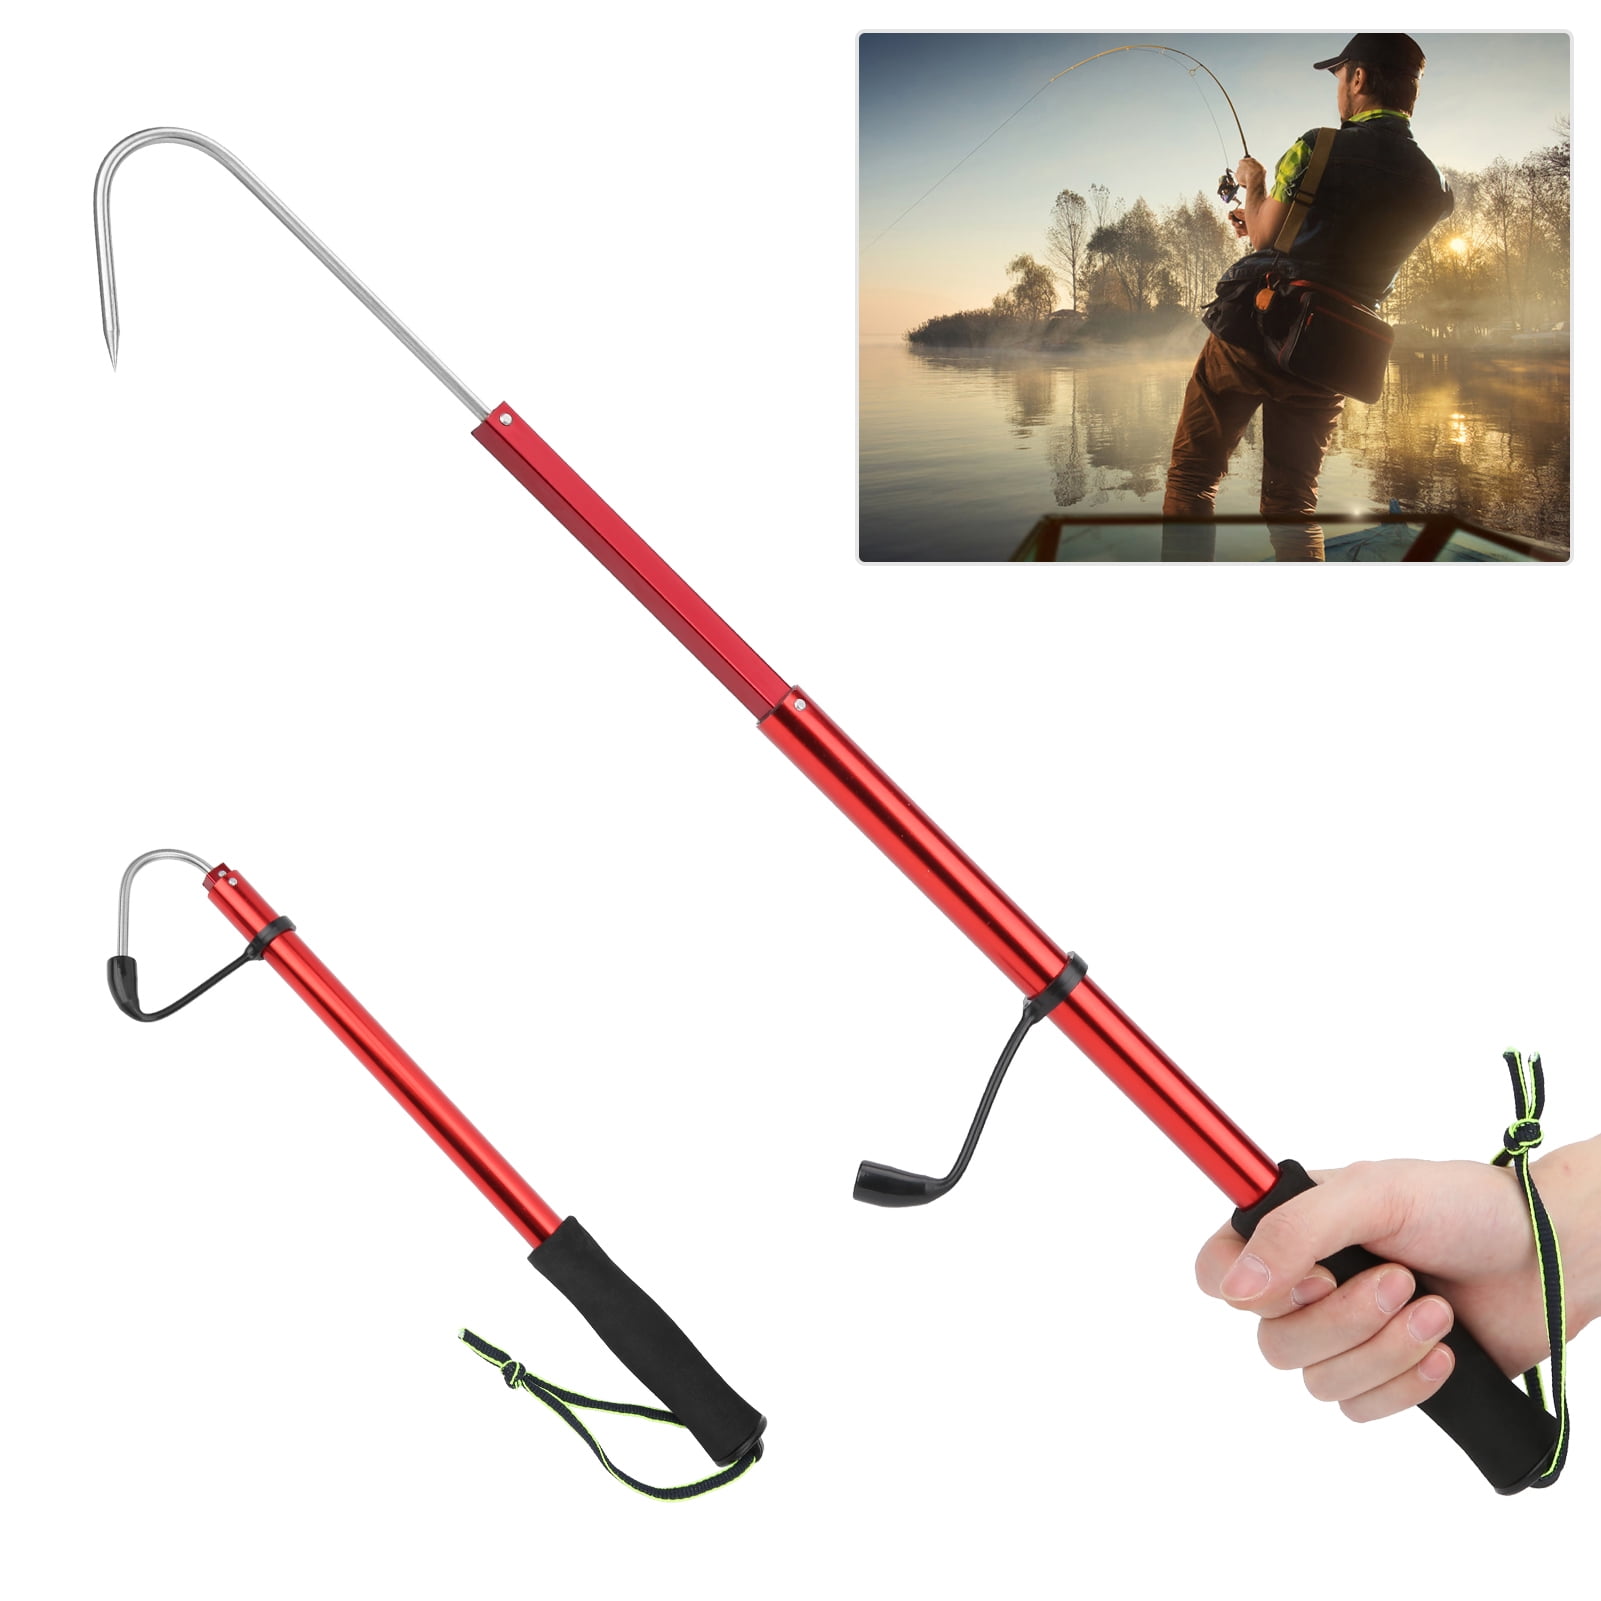 Portable Foldable Hook Removers For Fishing With Telescopic Sea Gaff Grip  And Stainless Steel Lip Spear Gripper Professional Tackle Accessory 230113  From Yujia09, $28.21